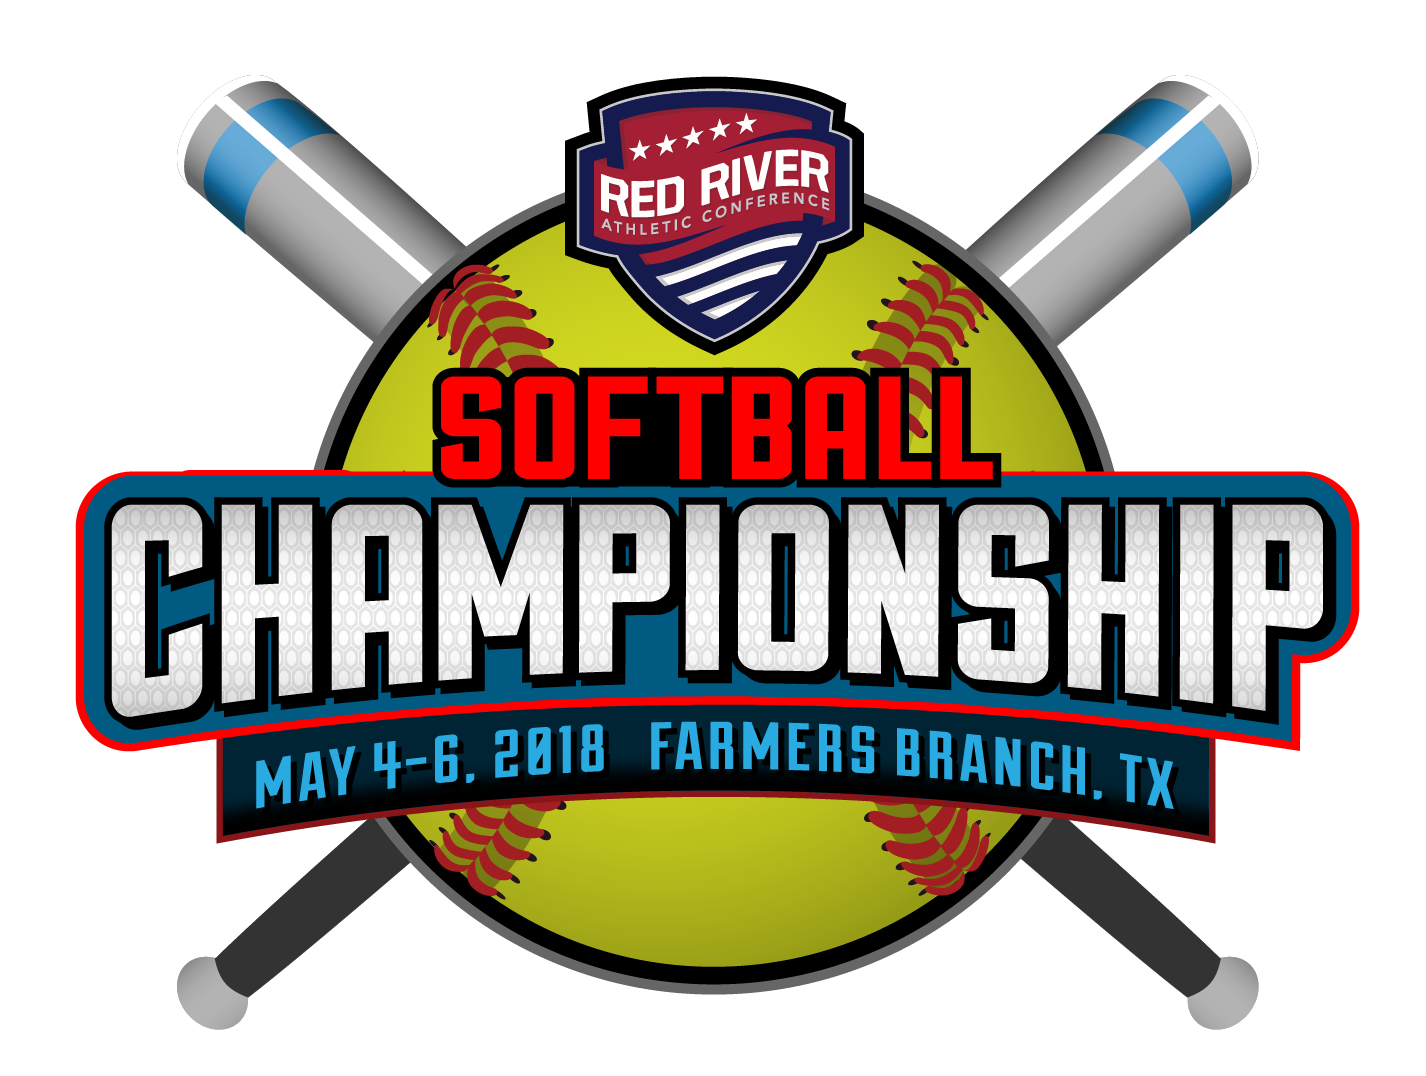 Red river athletic conference. Softball clipart women's